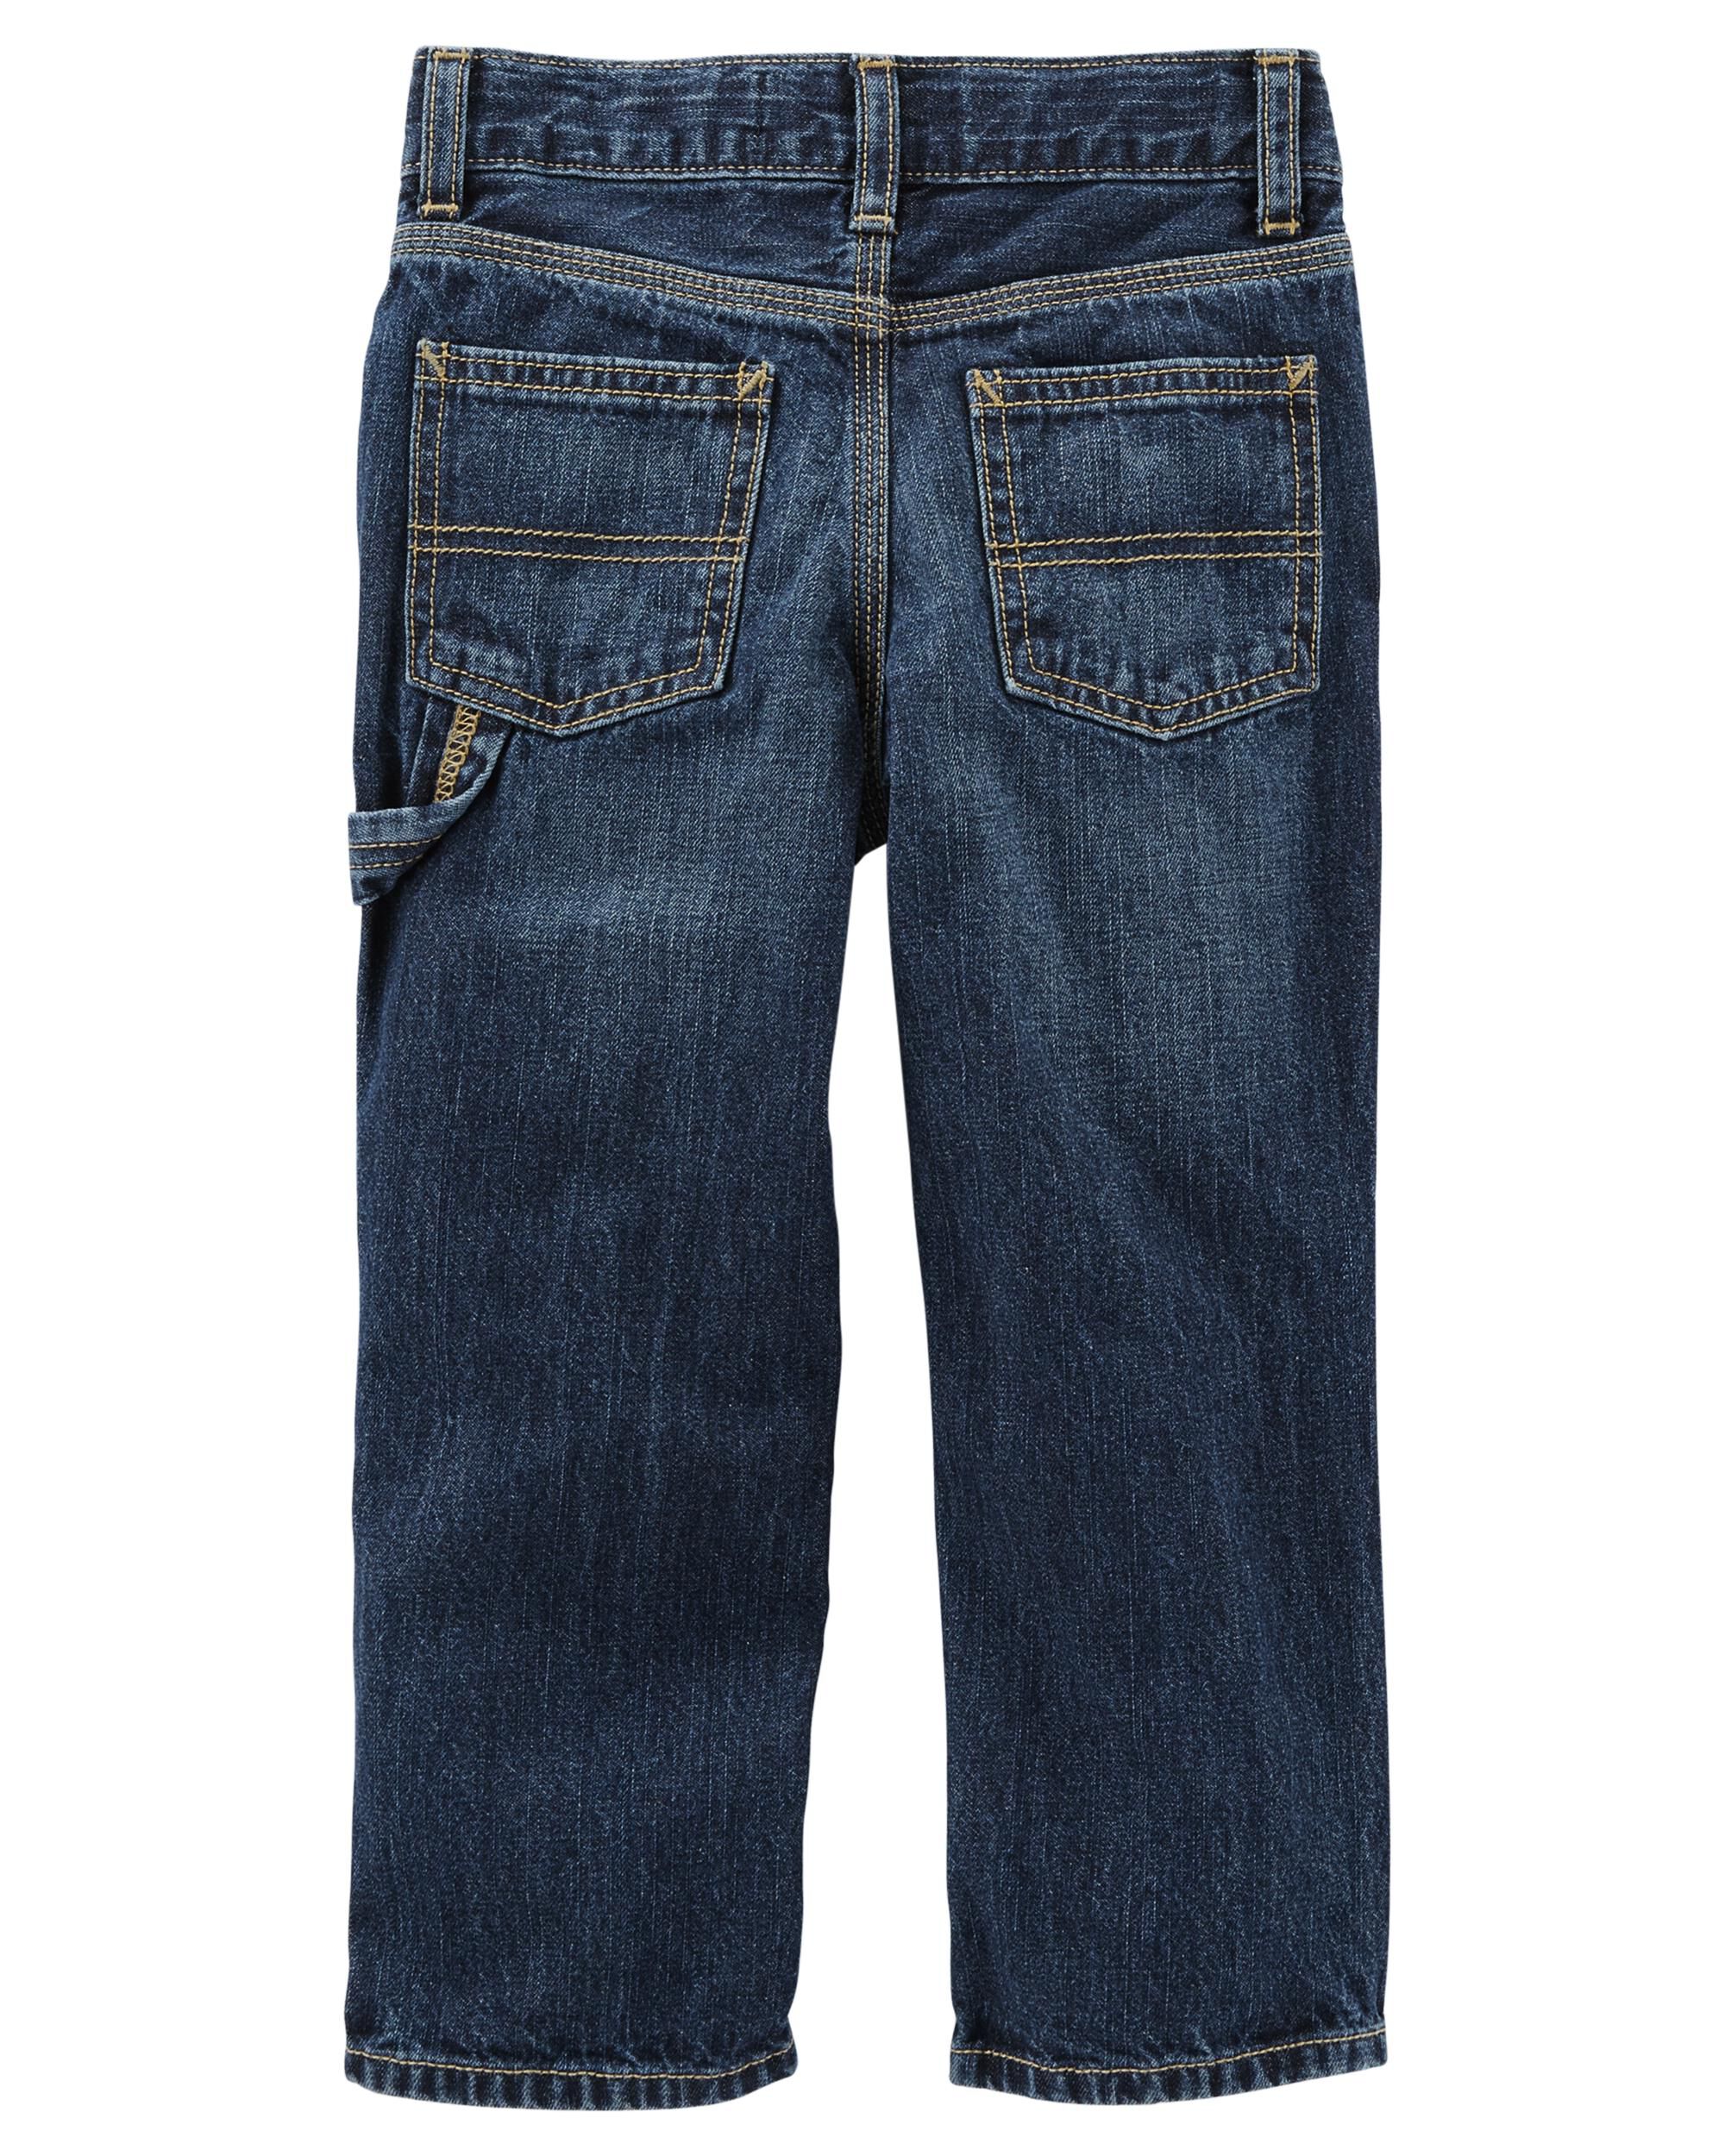 carters baby boy jeans